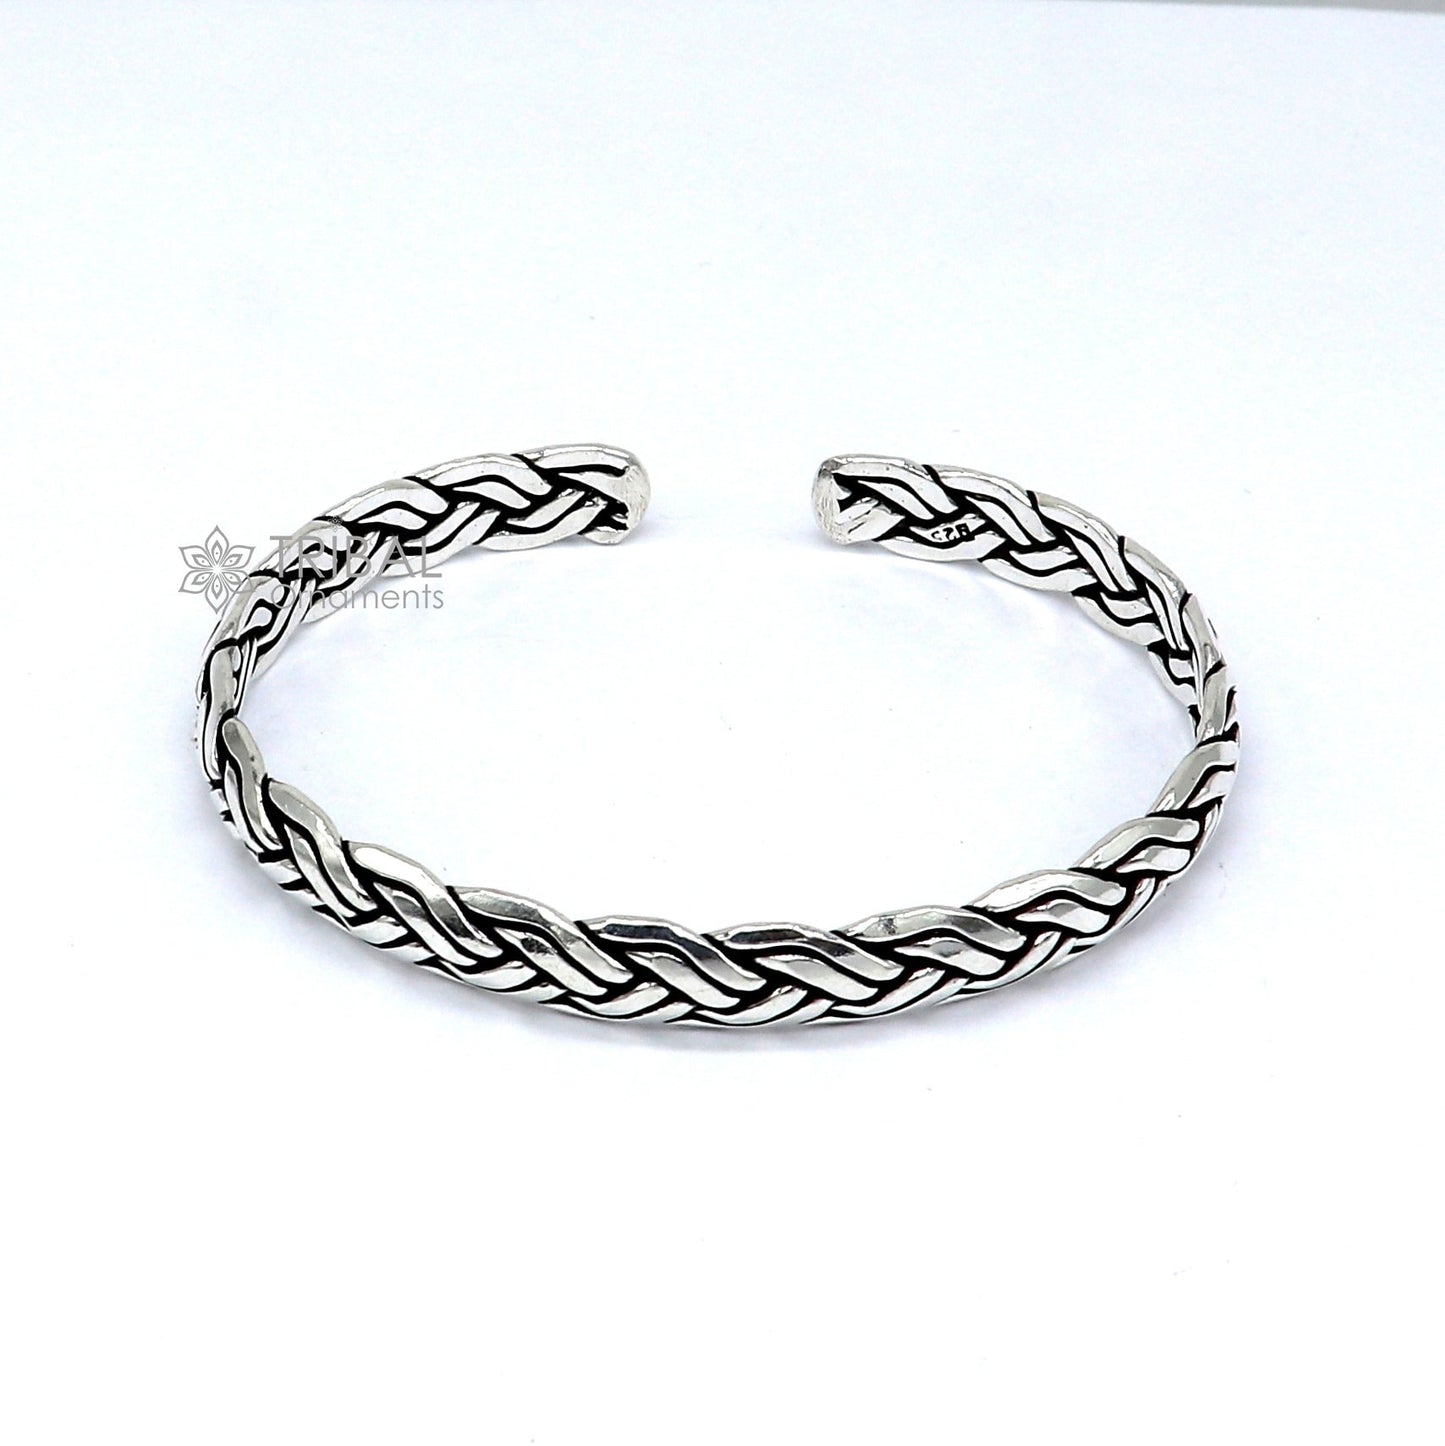 925 sterling silver handmade adjustable cuff bangle bracelet unsex gifting jewelry CUFF225 - TRIBAL ORNAMENTS